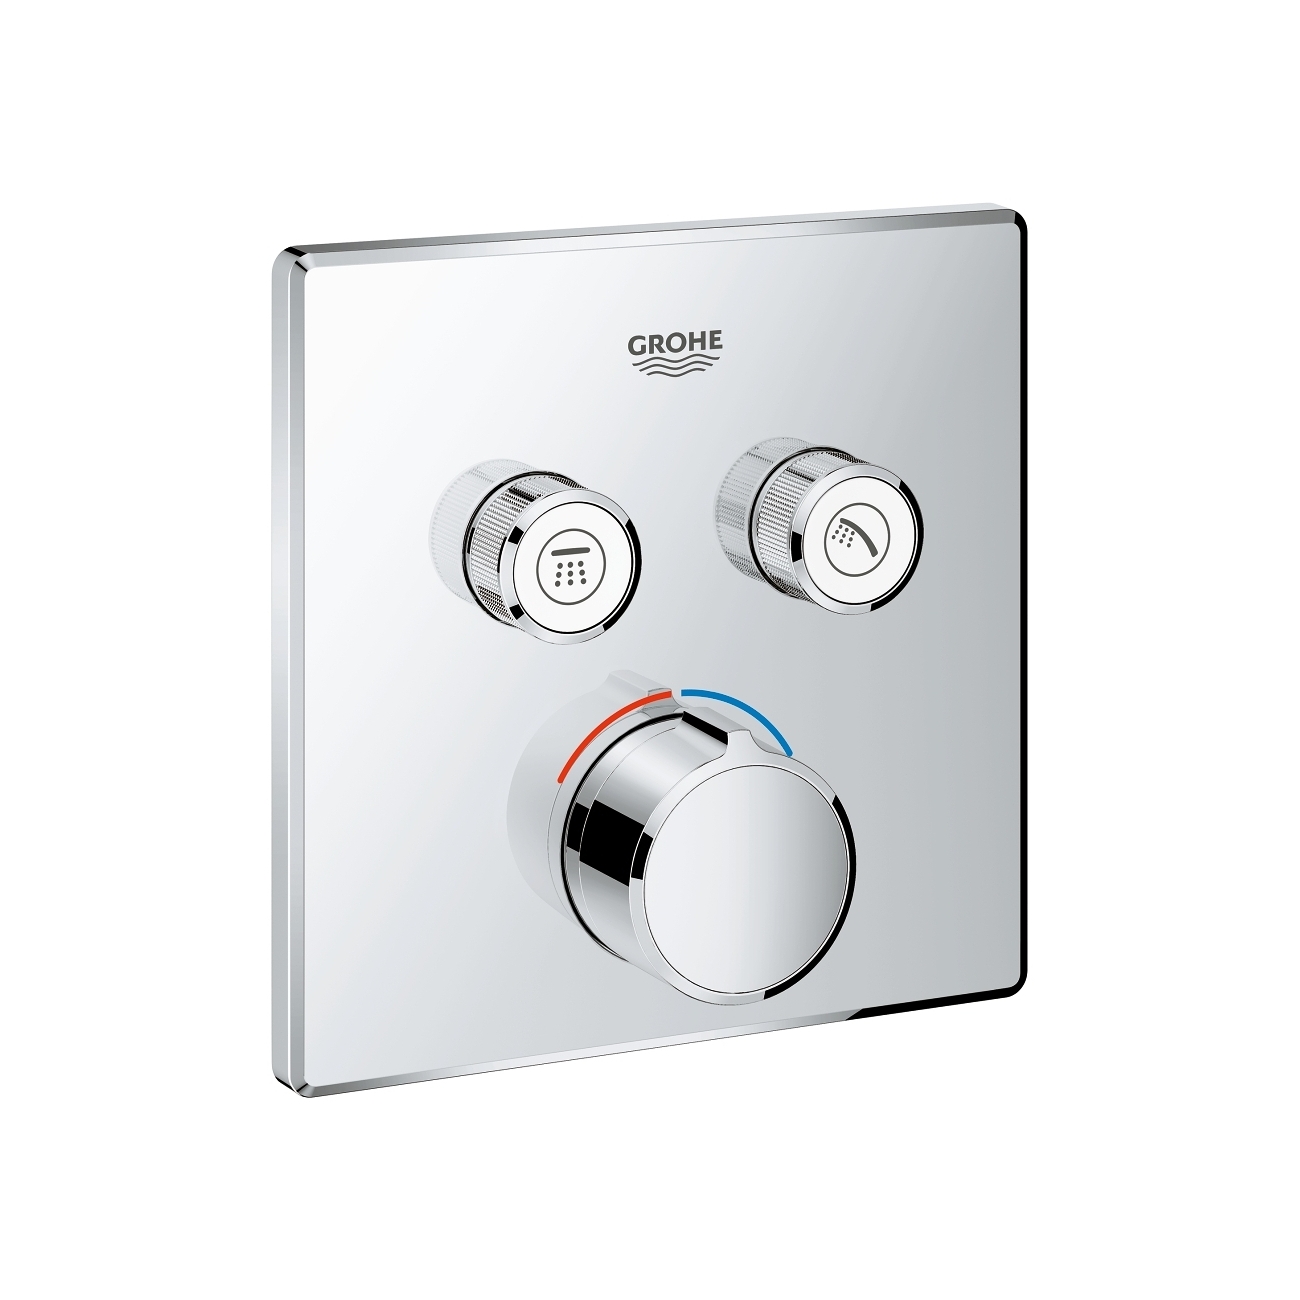 GROHE MIX SMARTCONTROL THERMOSTATIC SHOWER MIXER